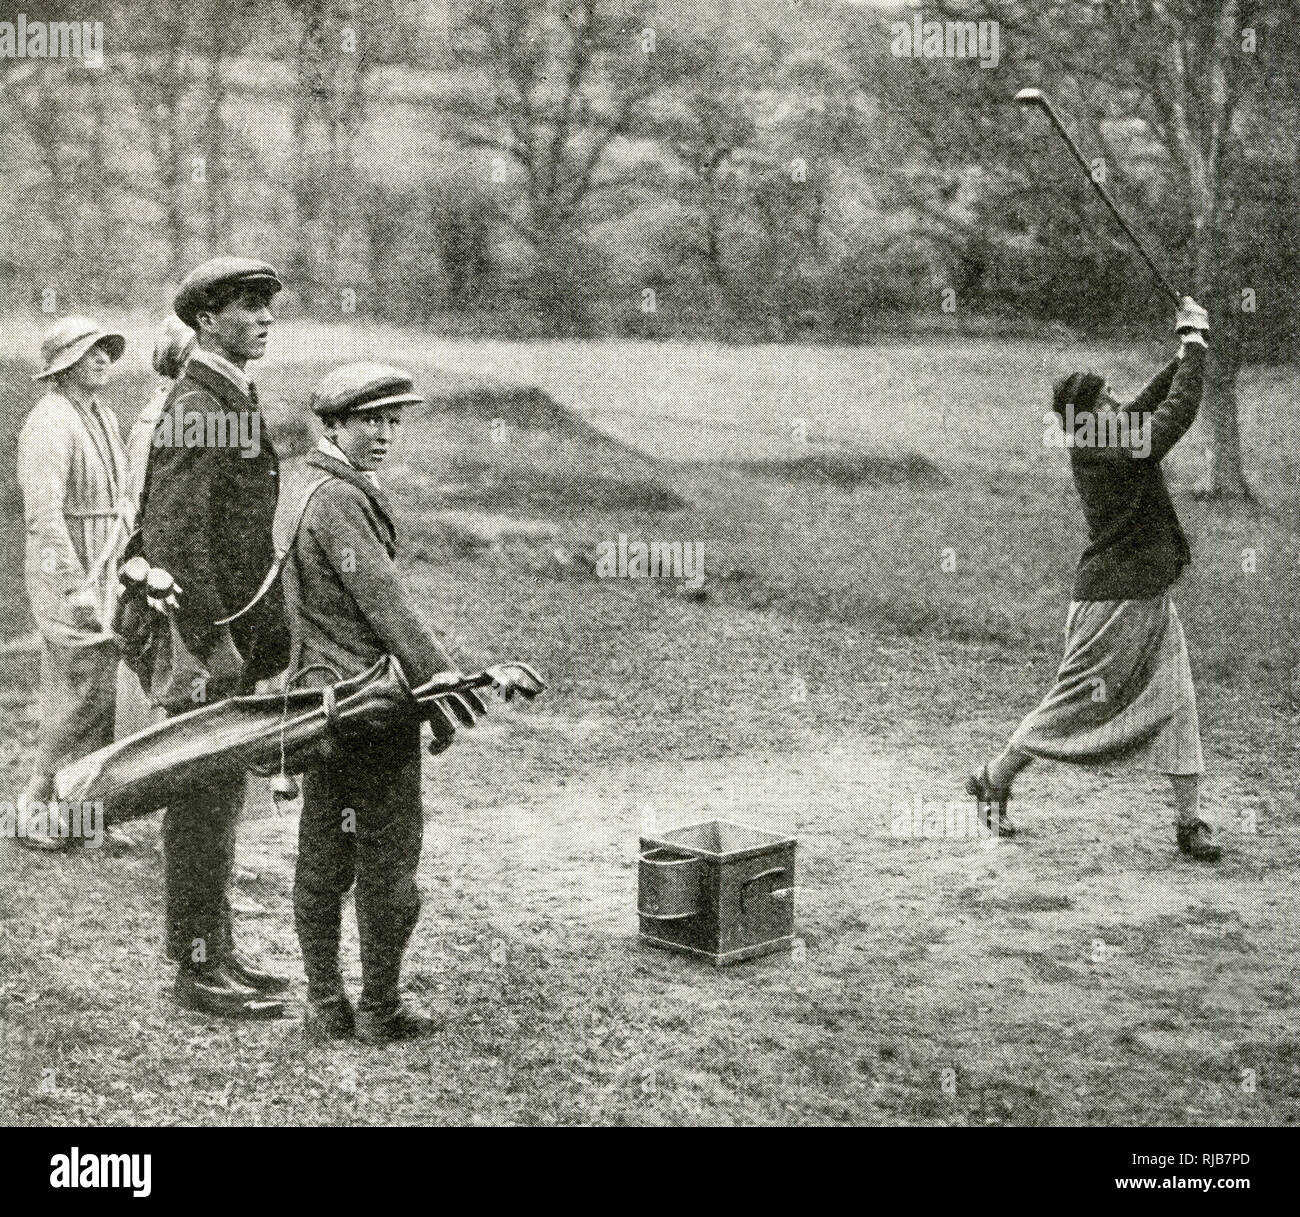 Men and women playing golf at Beaconsfield, Buckinghamshire Stock Photo